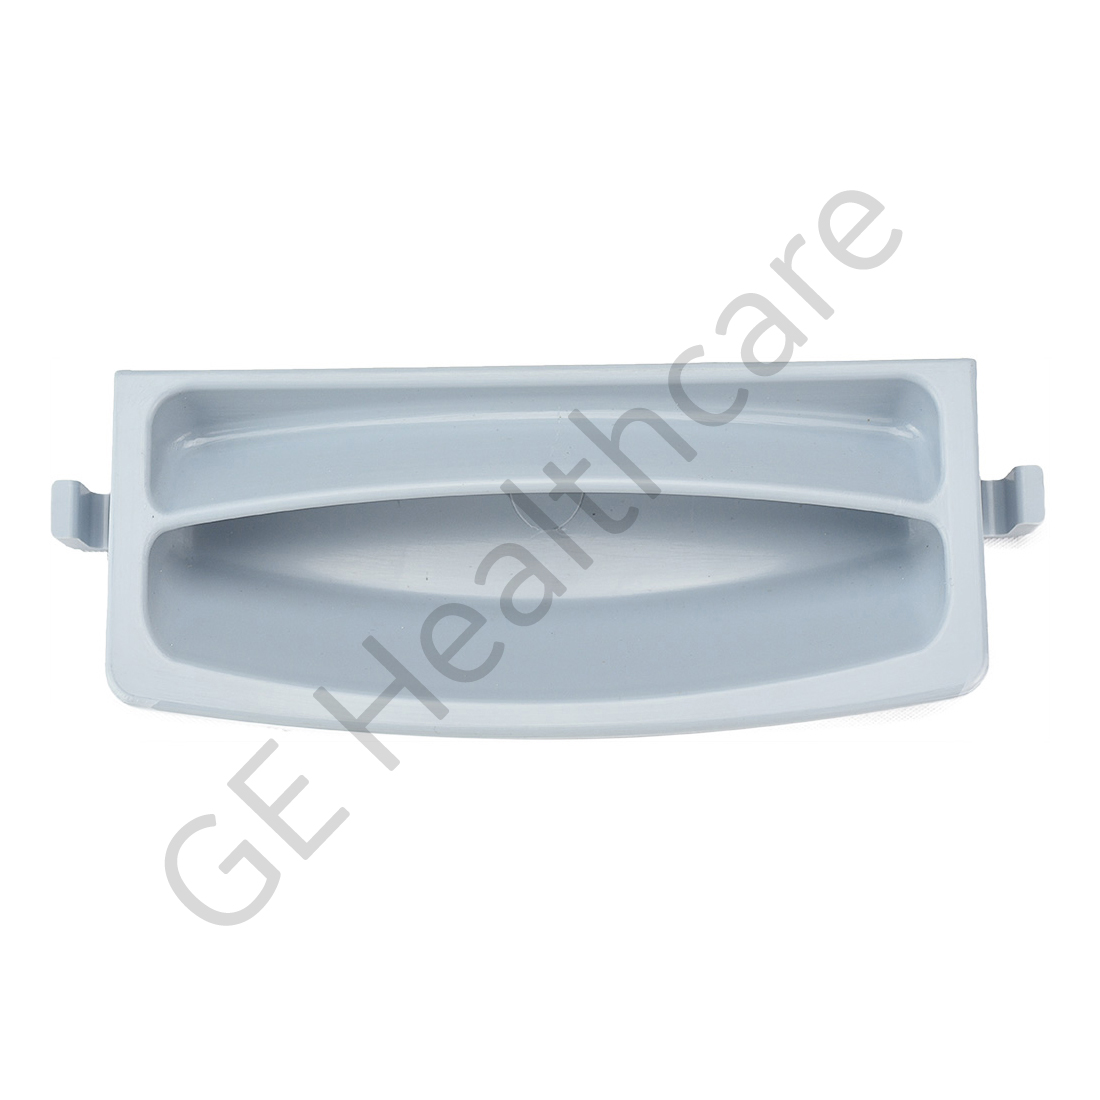 Drawer Handle - Injection Molded Plastic